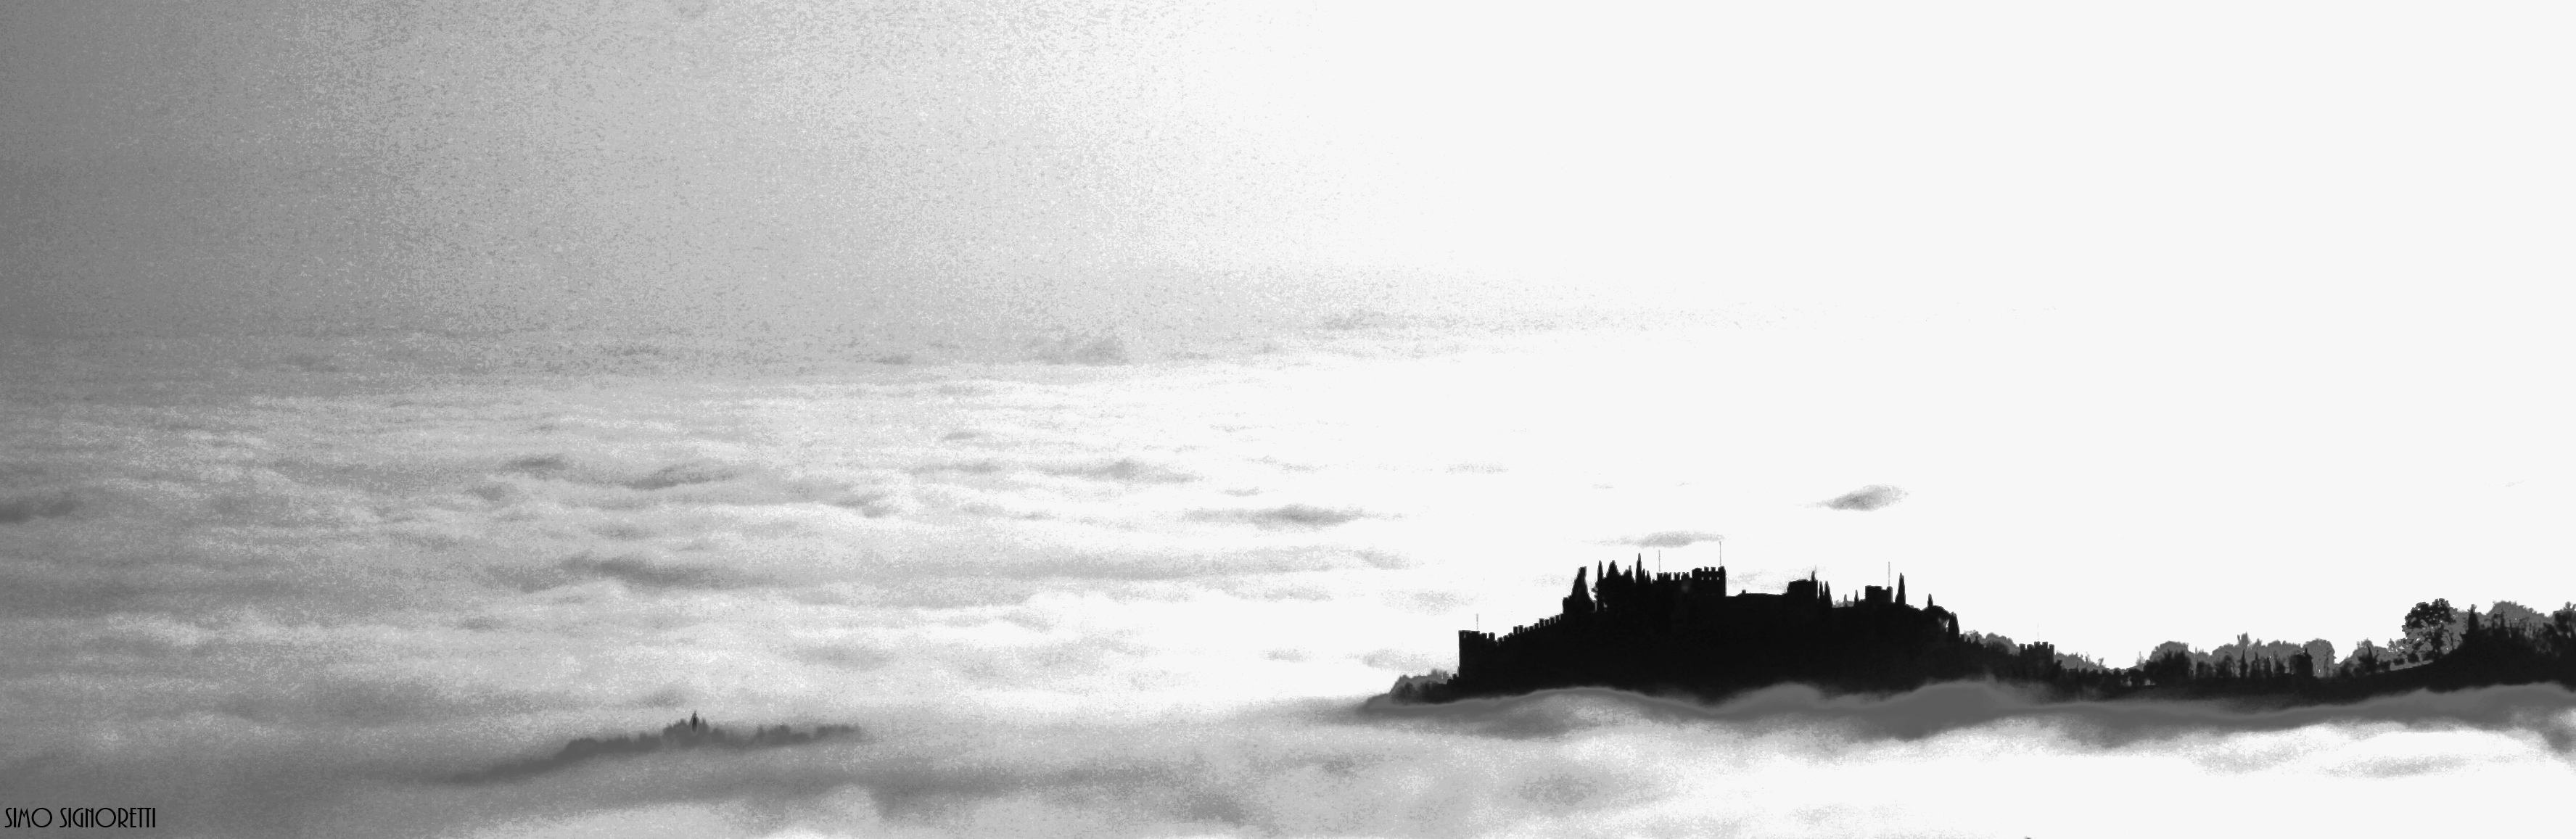 marostica castle in the mist...